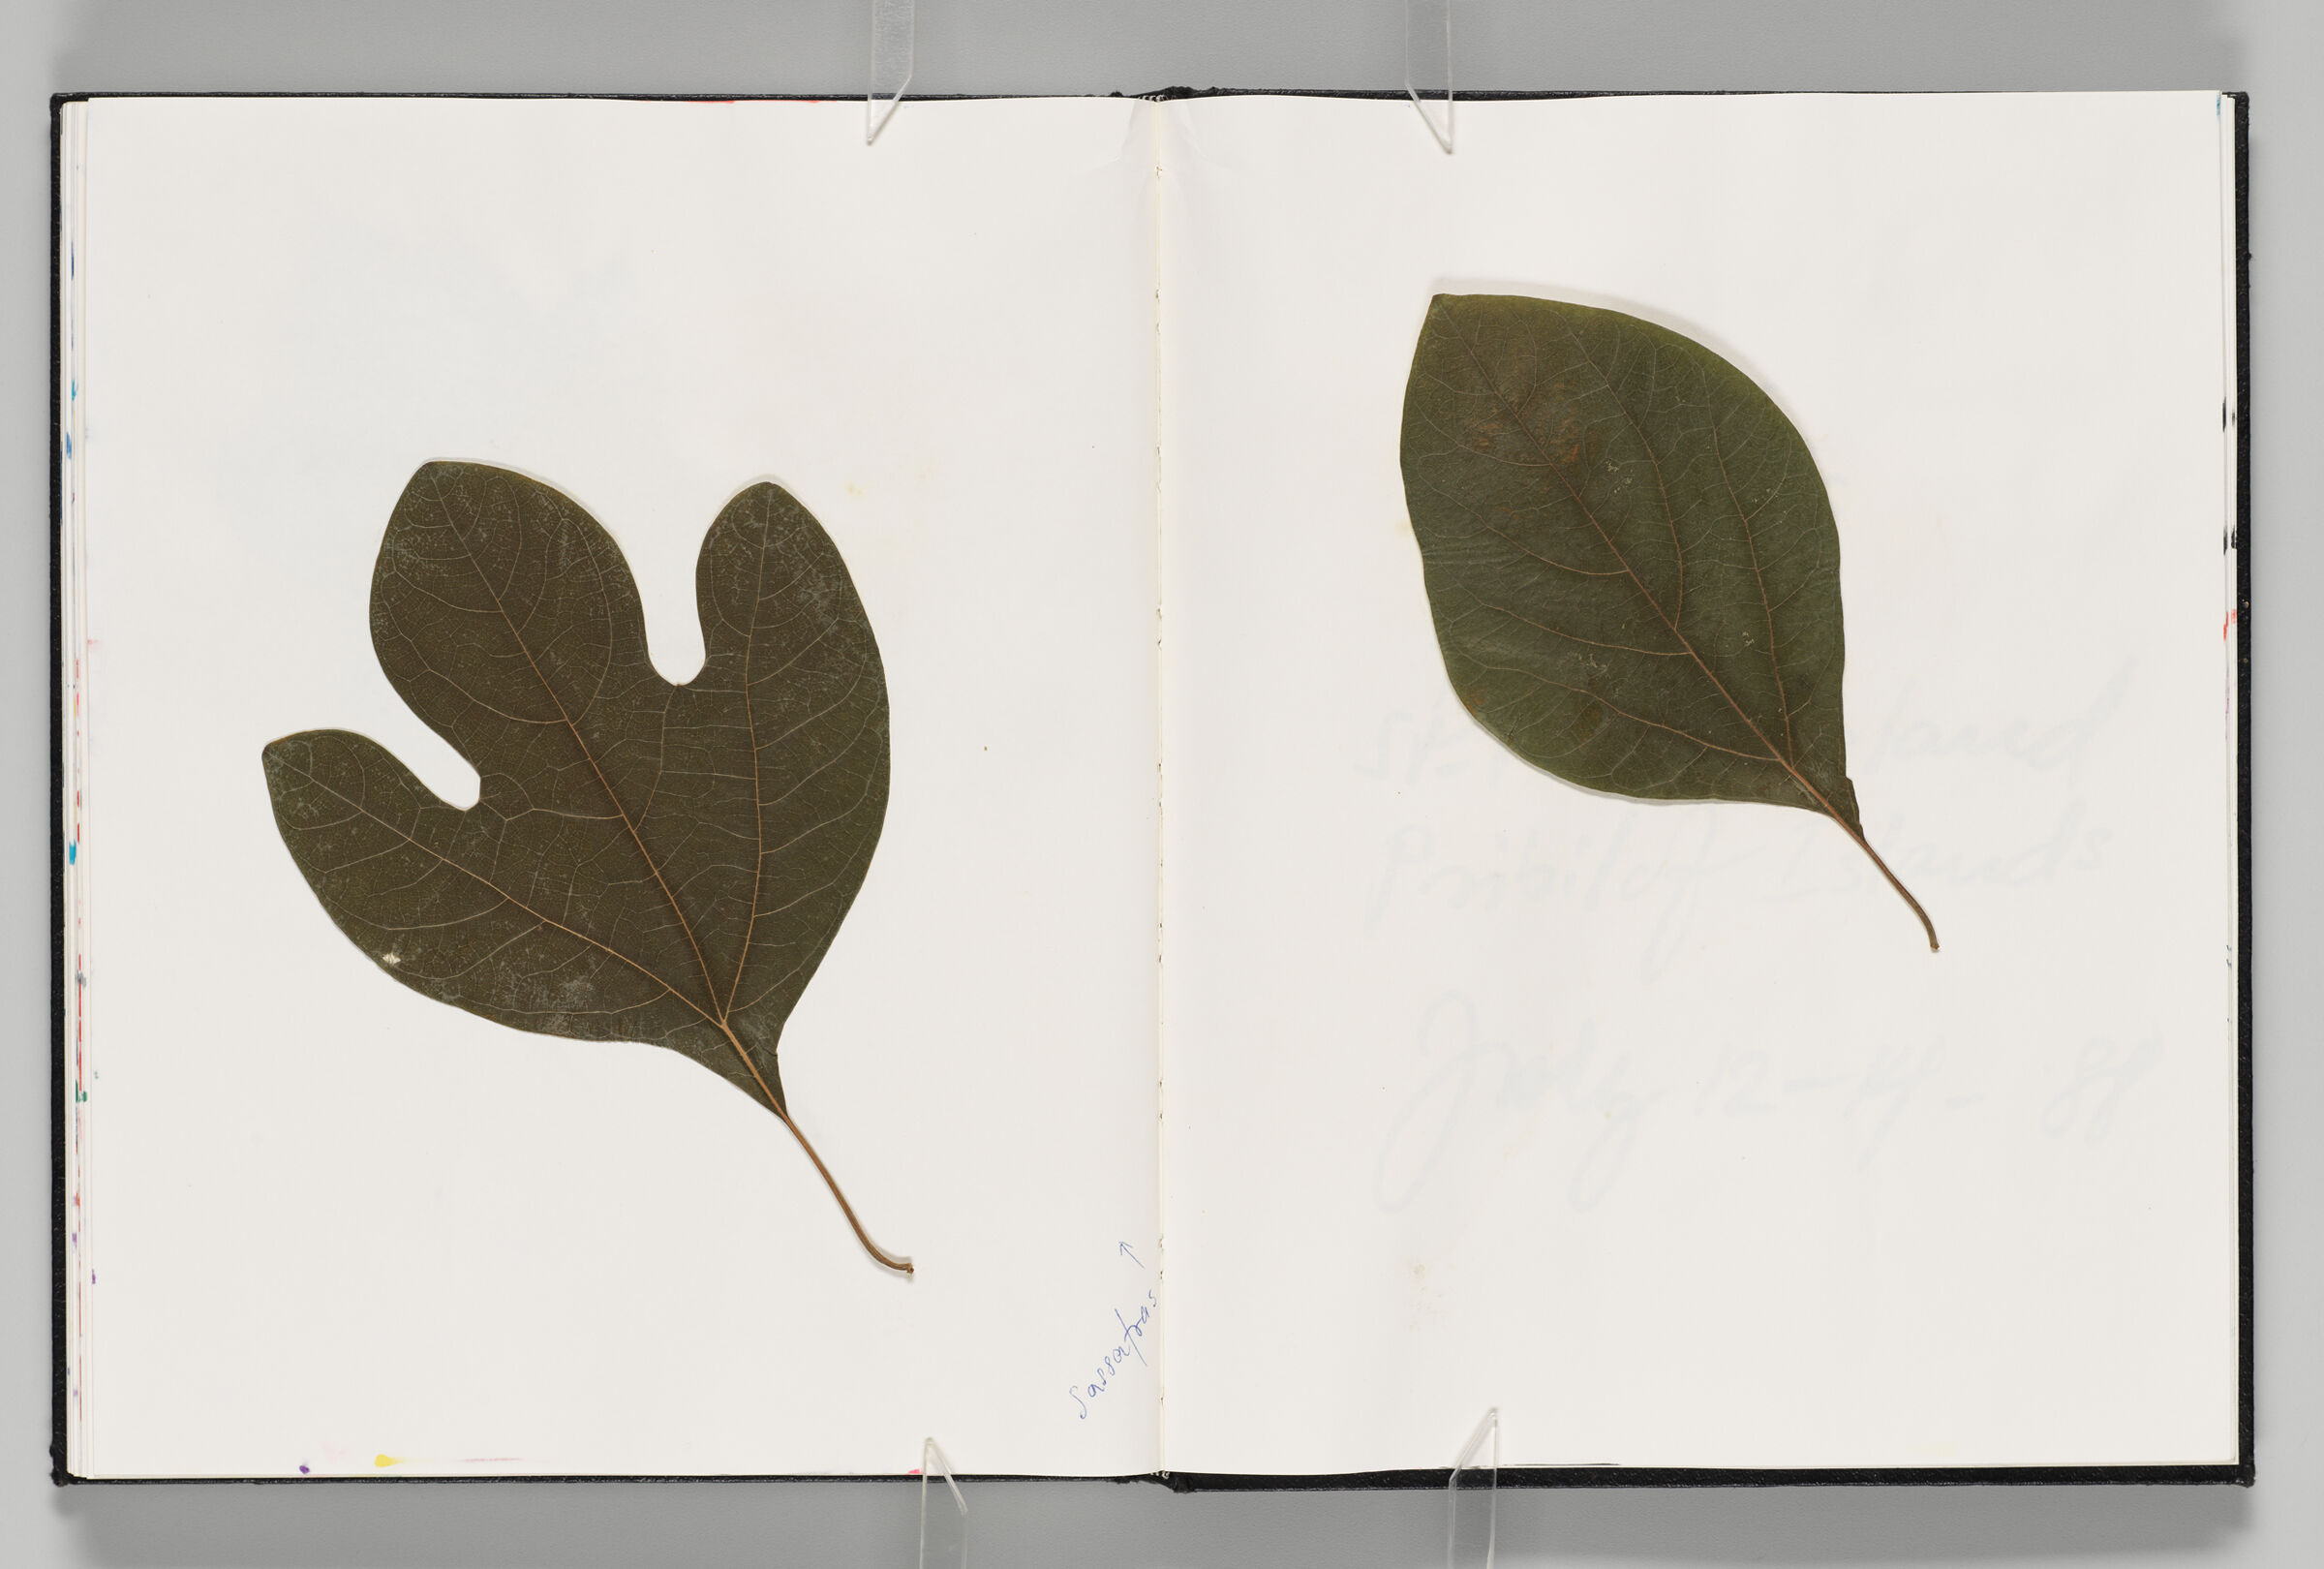 Untitled (Pressed And Adhered Leaf, Left Page); Untitled (Pressed And Adhered Leaf, Right Page)